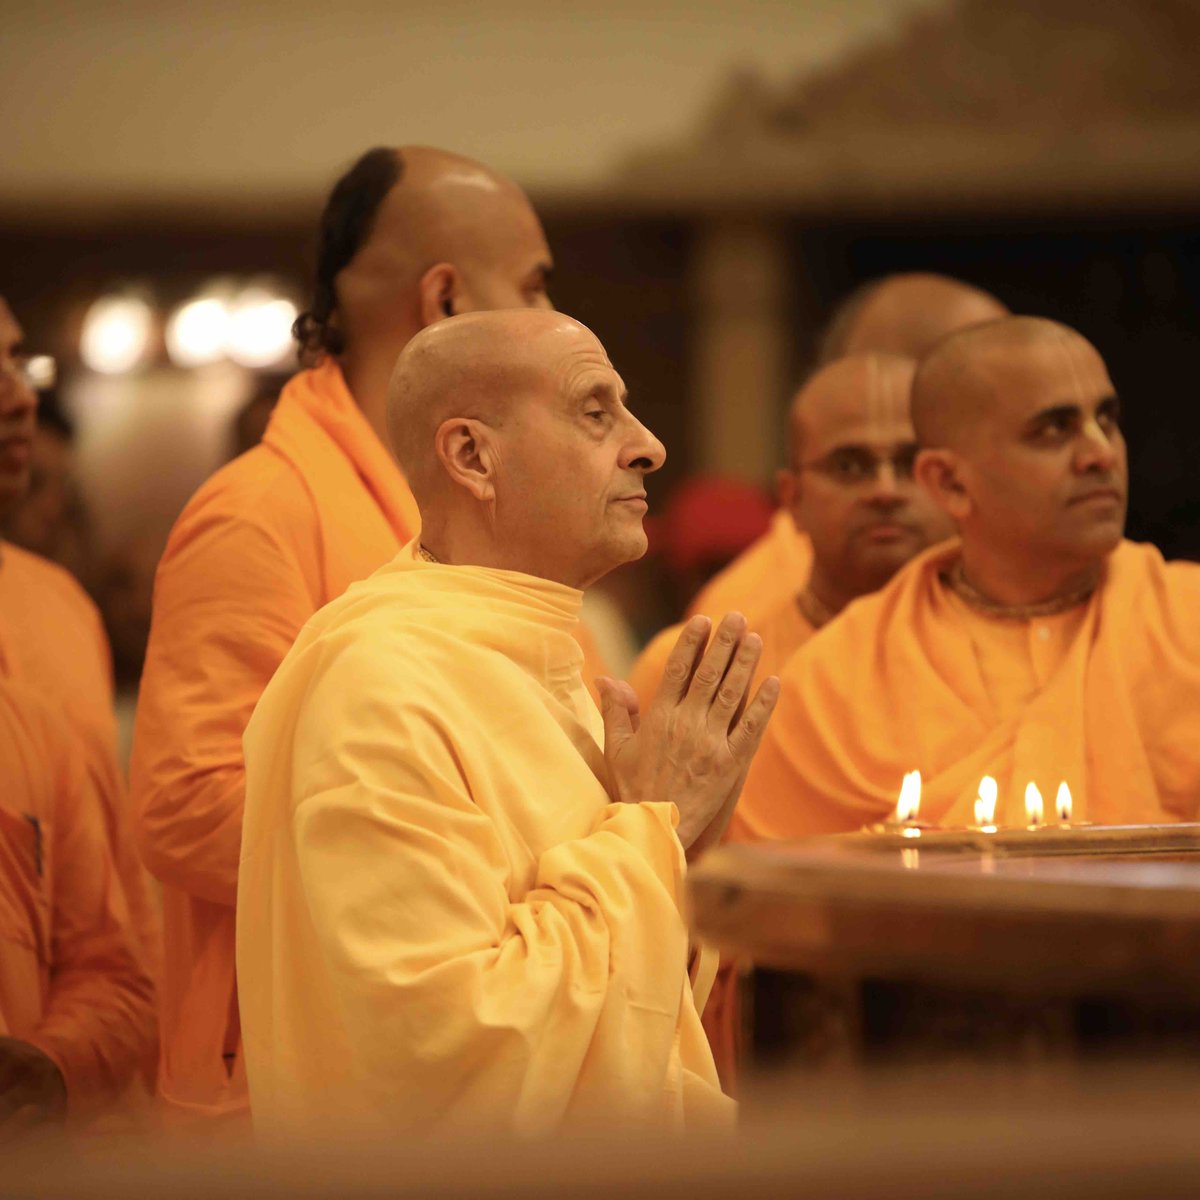 “The more serious you are about spiritual life, the more you keep your mind in captivity.” - His Holiness Radhanath Swami #spiritual #life #radhanathswami